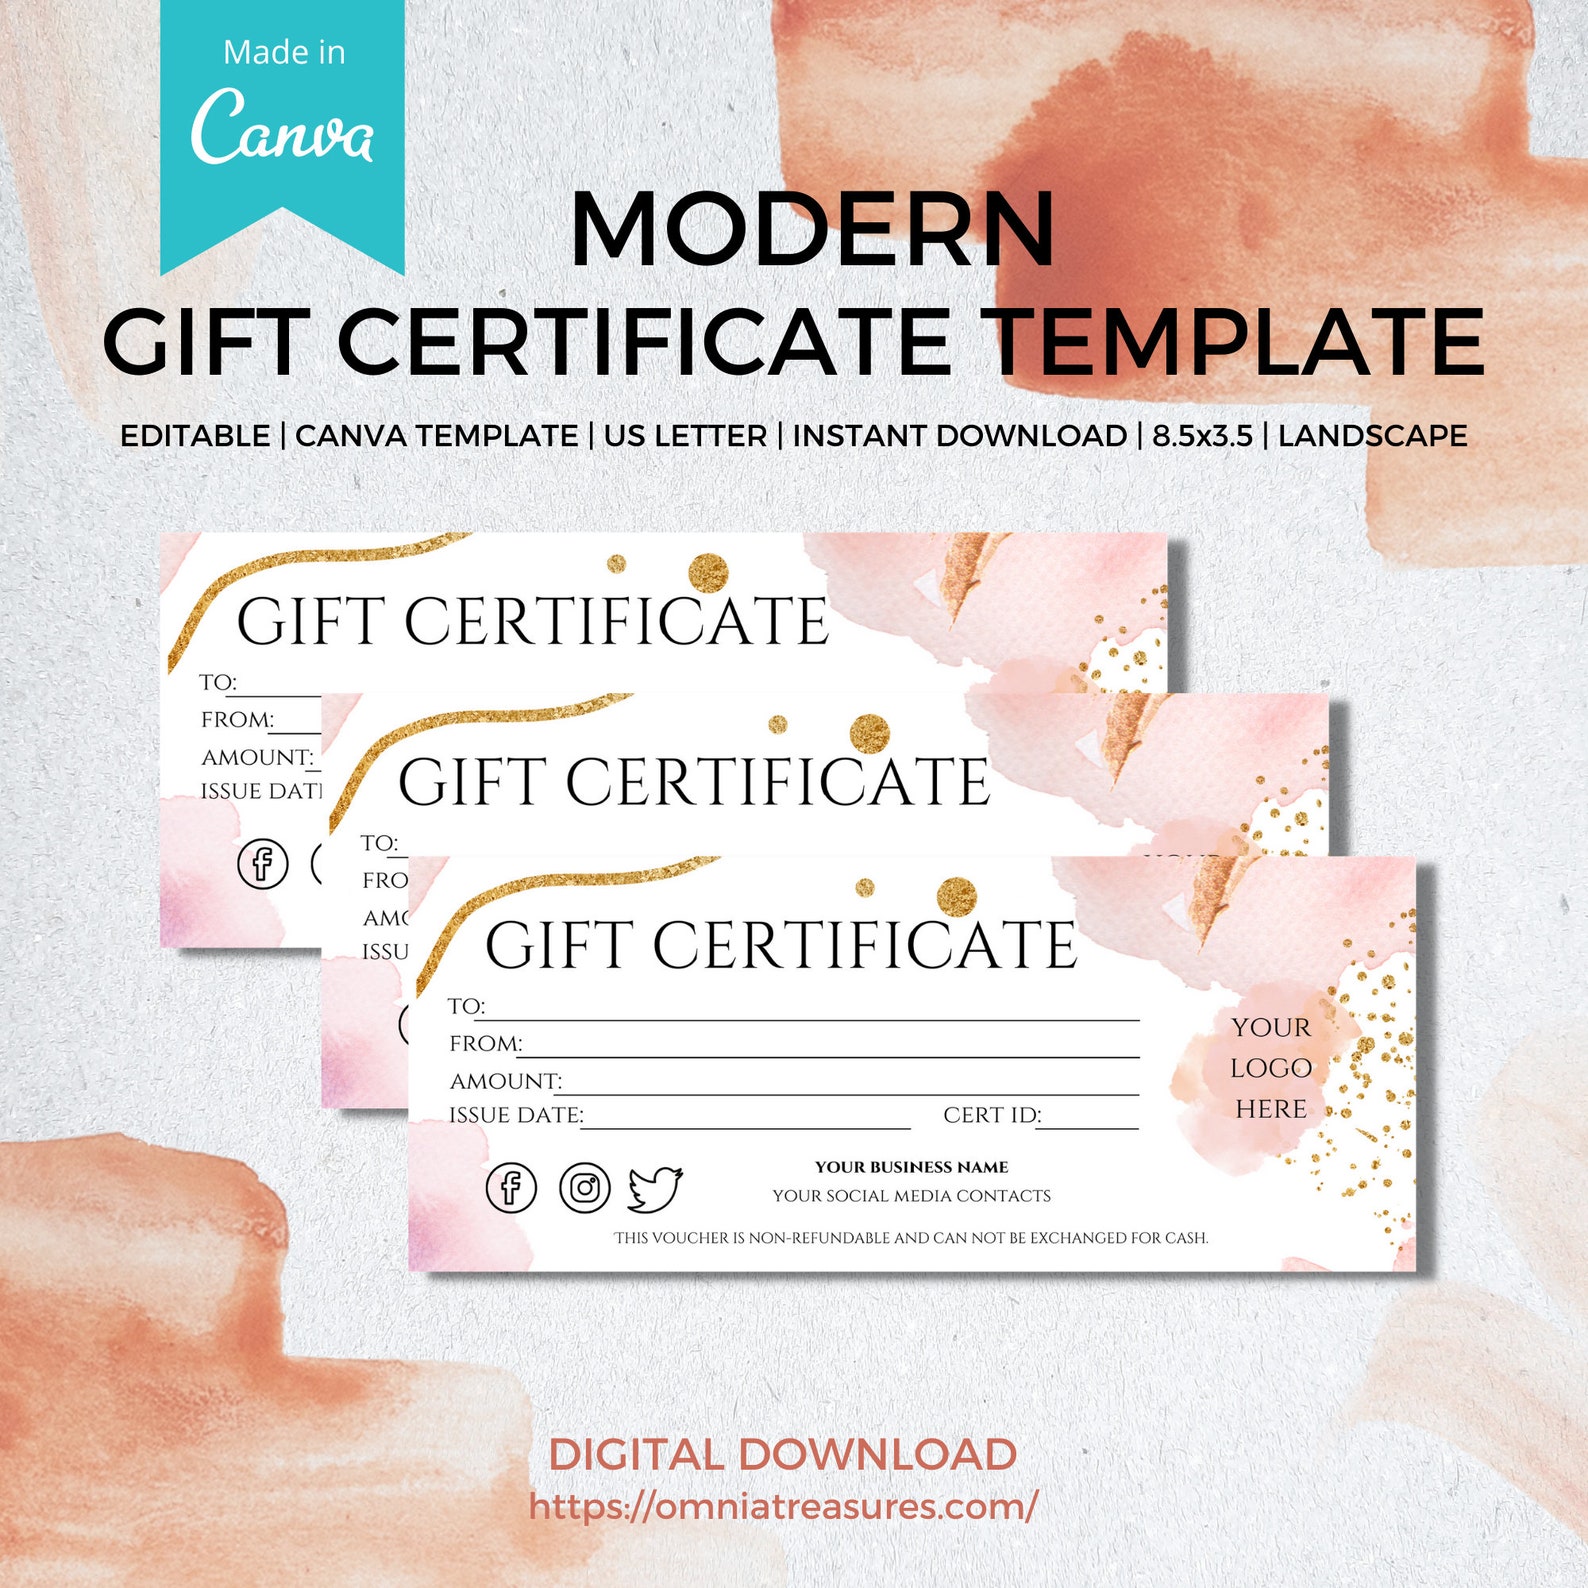 Canva Gift Certificate Template Small Business Voucher Etsy